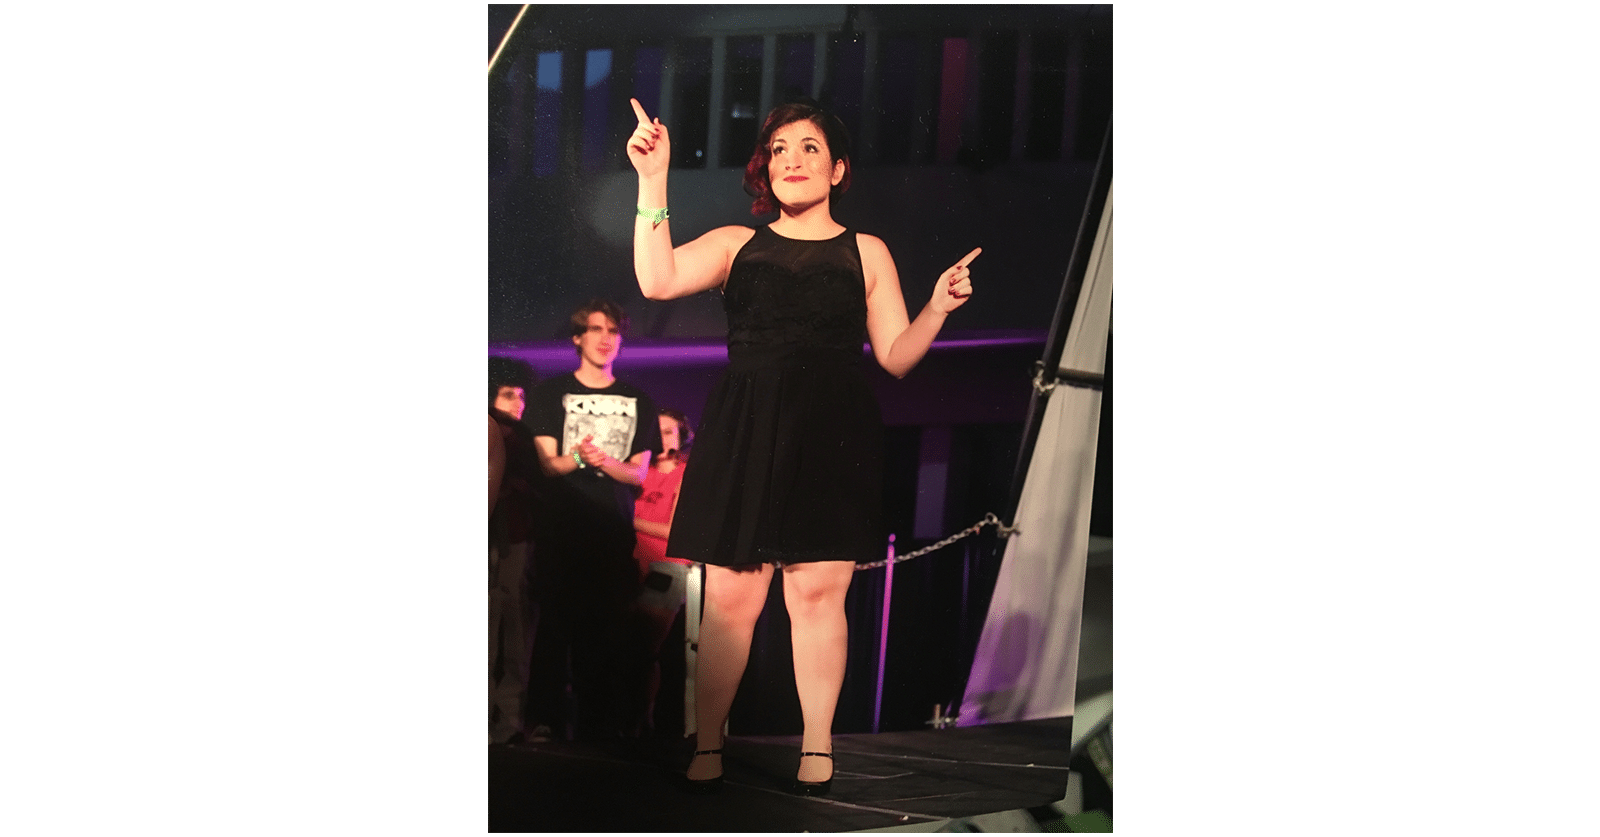 Domi La Russa as a CalArts student on stage wearing a black dress.